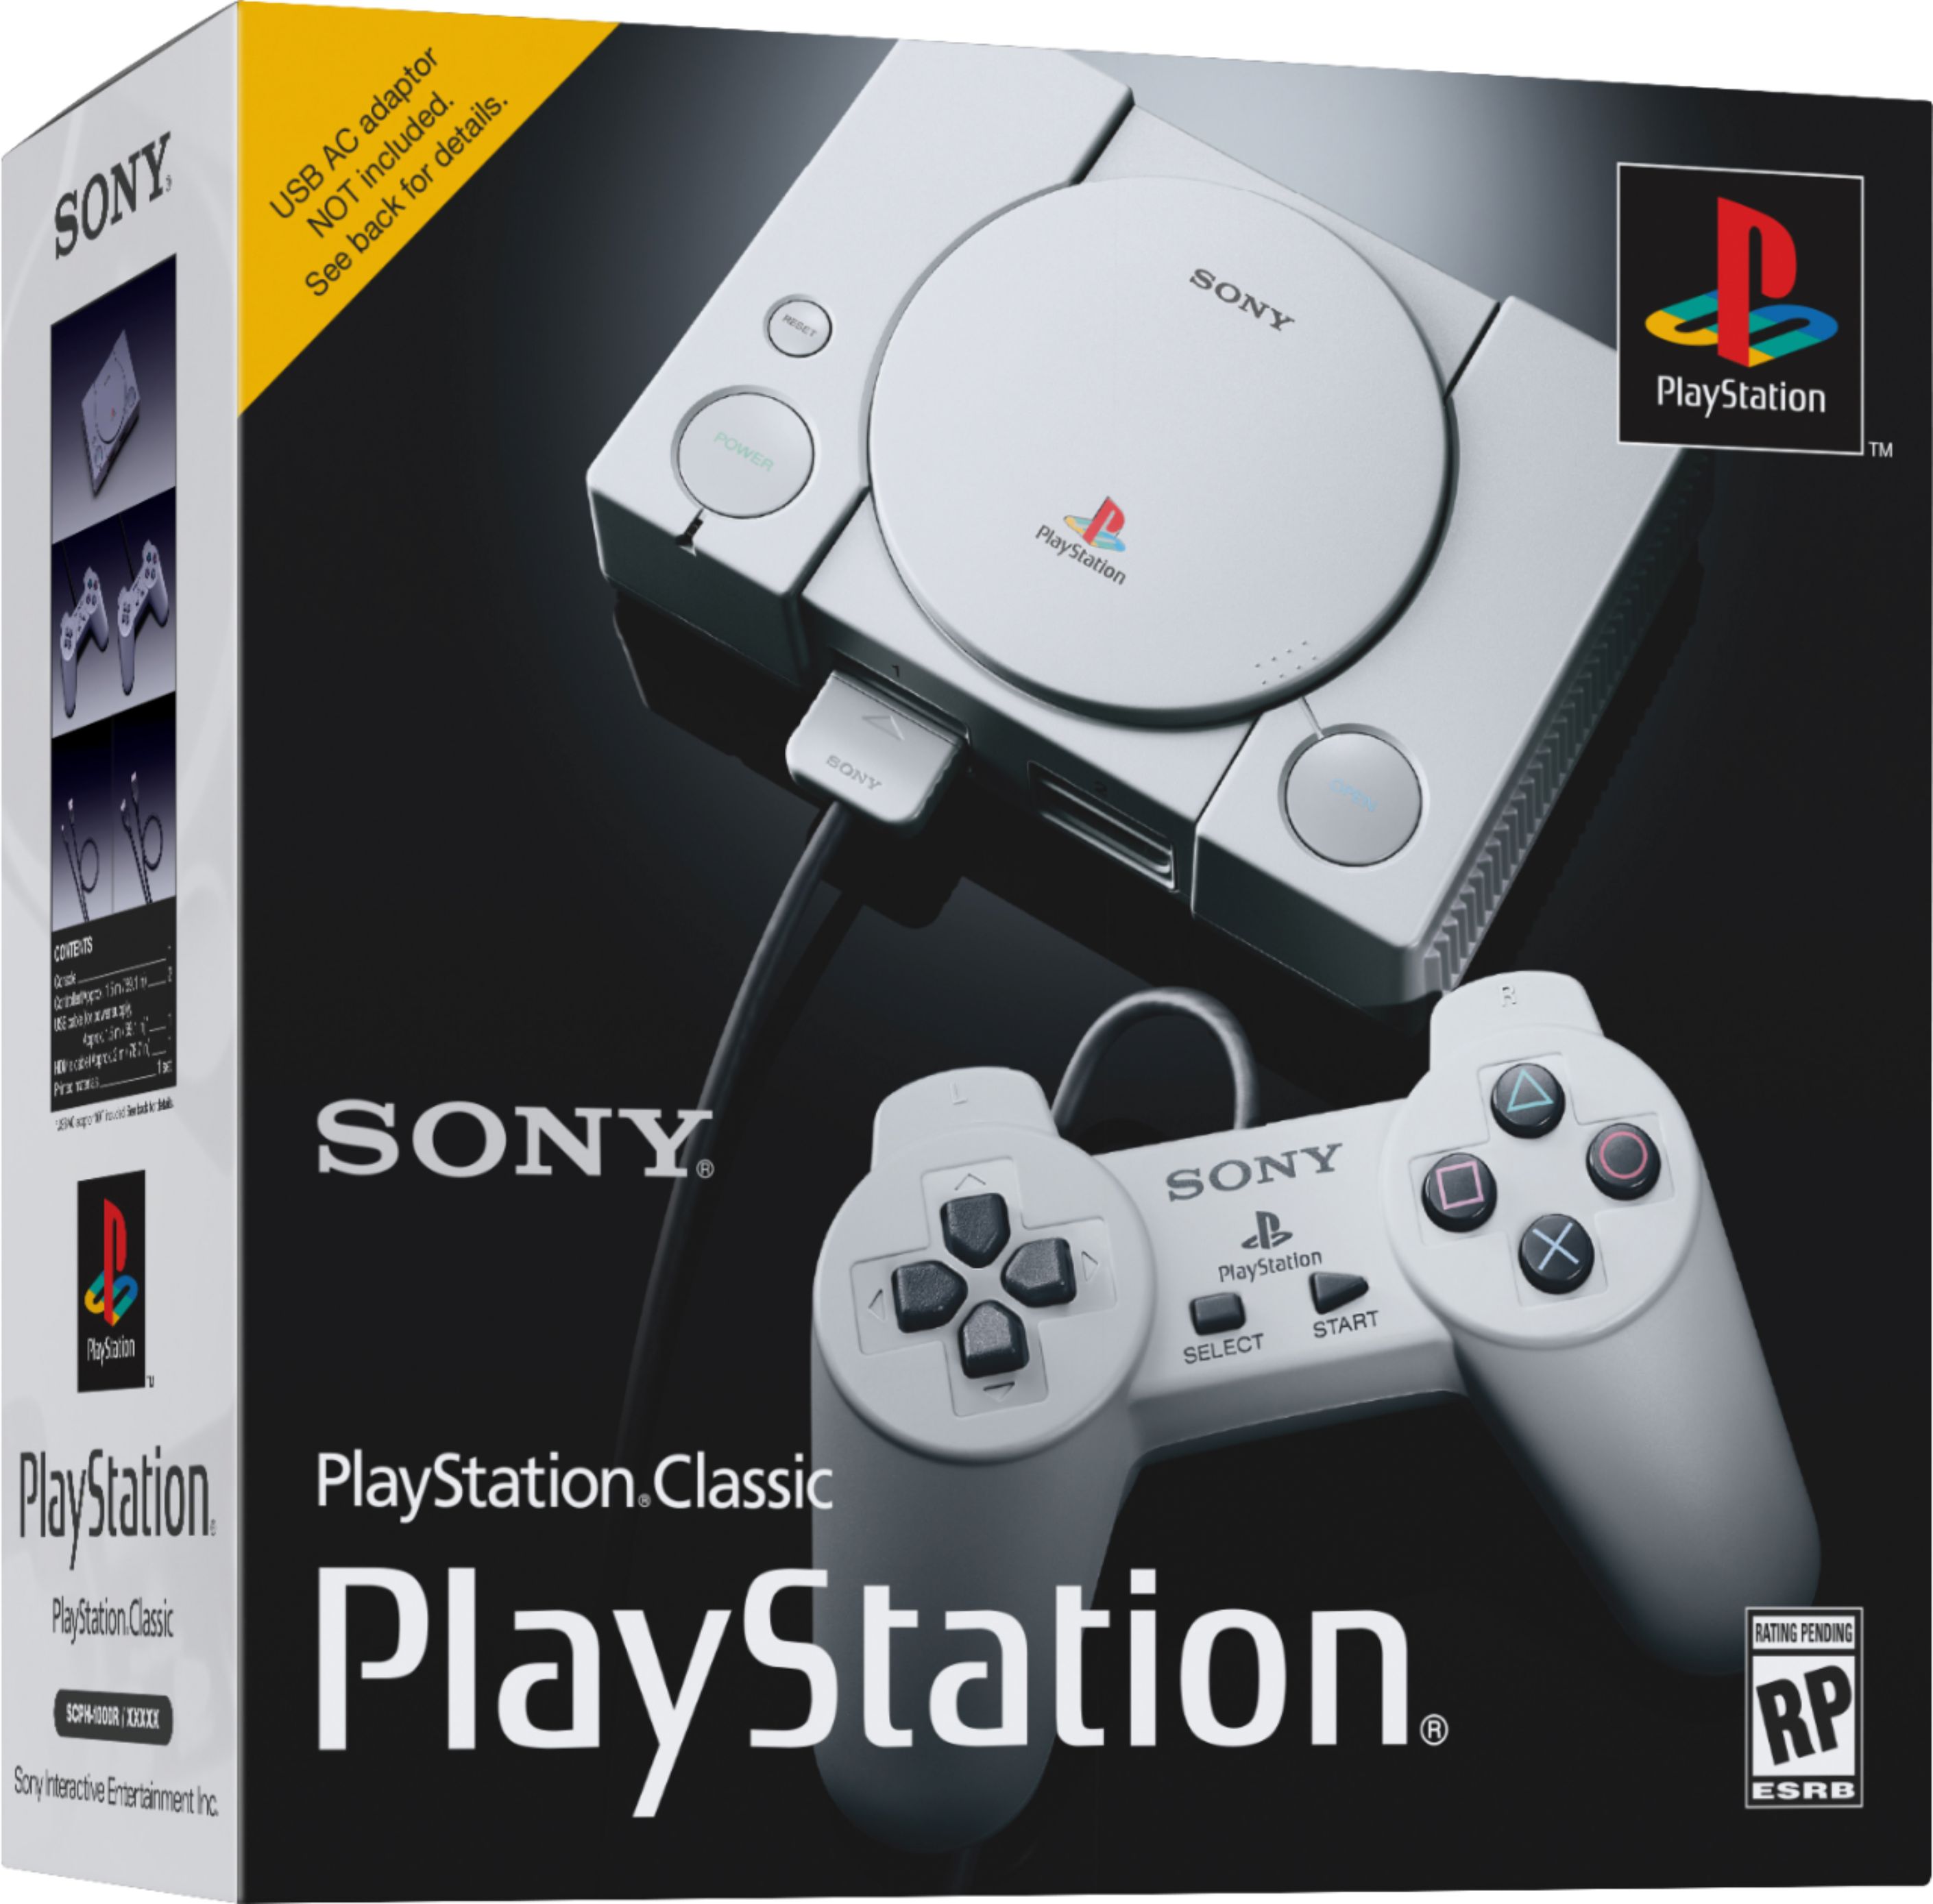 The PlayStation Classic is On Sale For $39.99